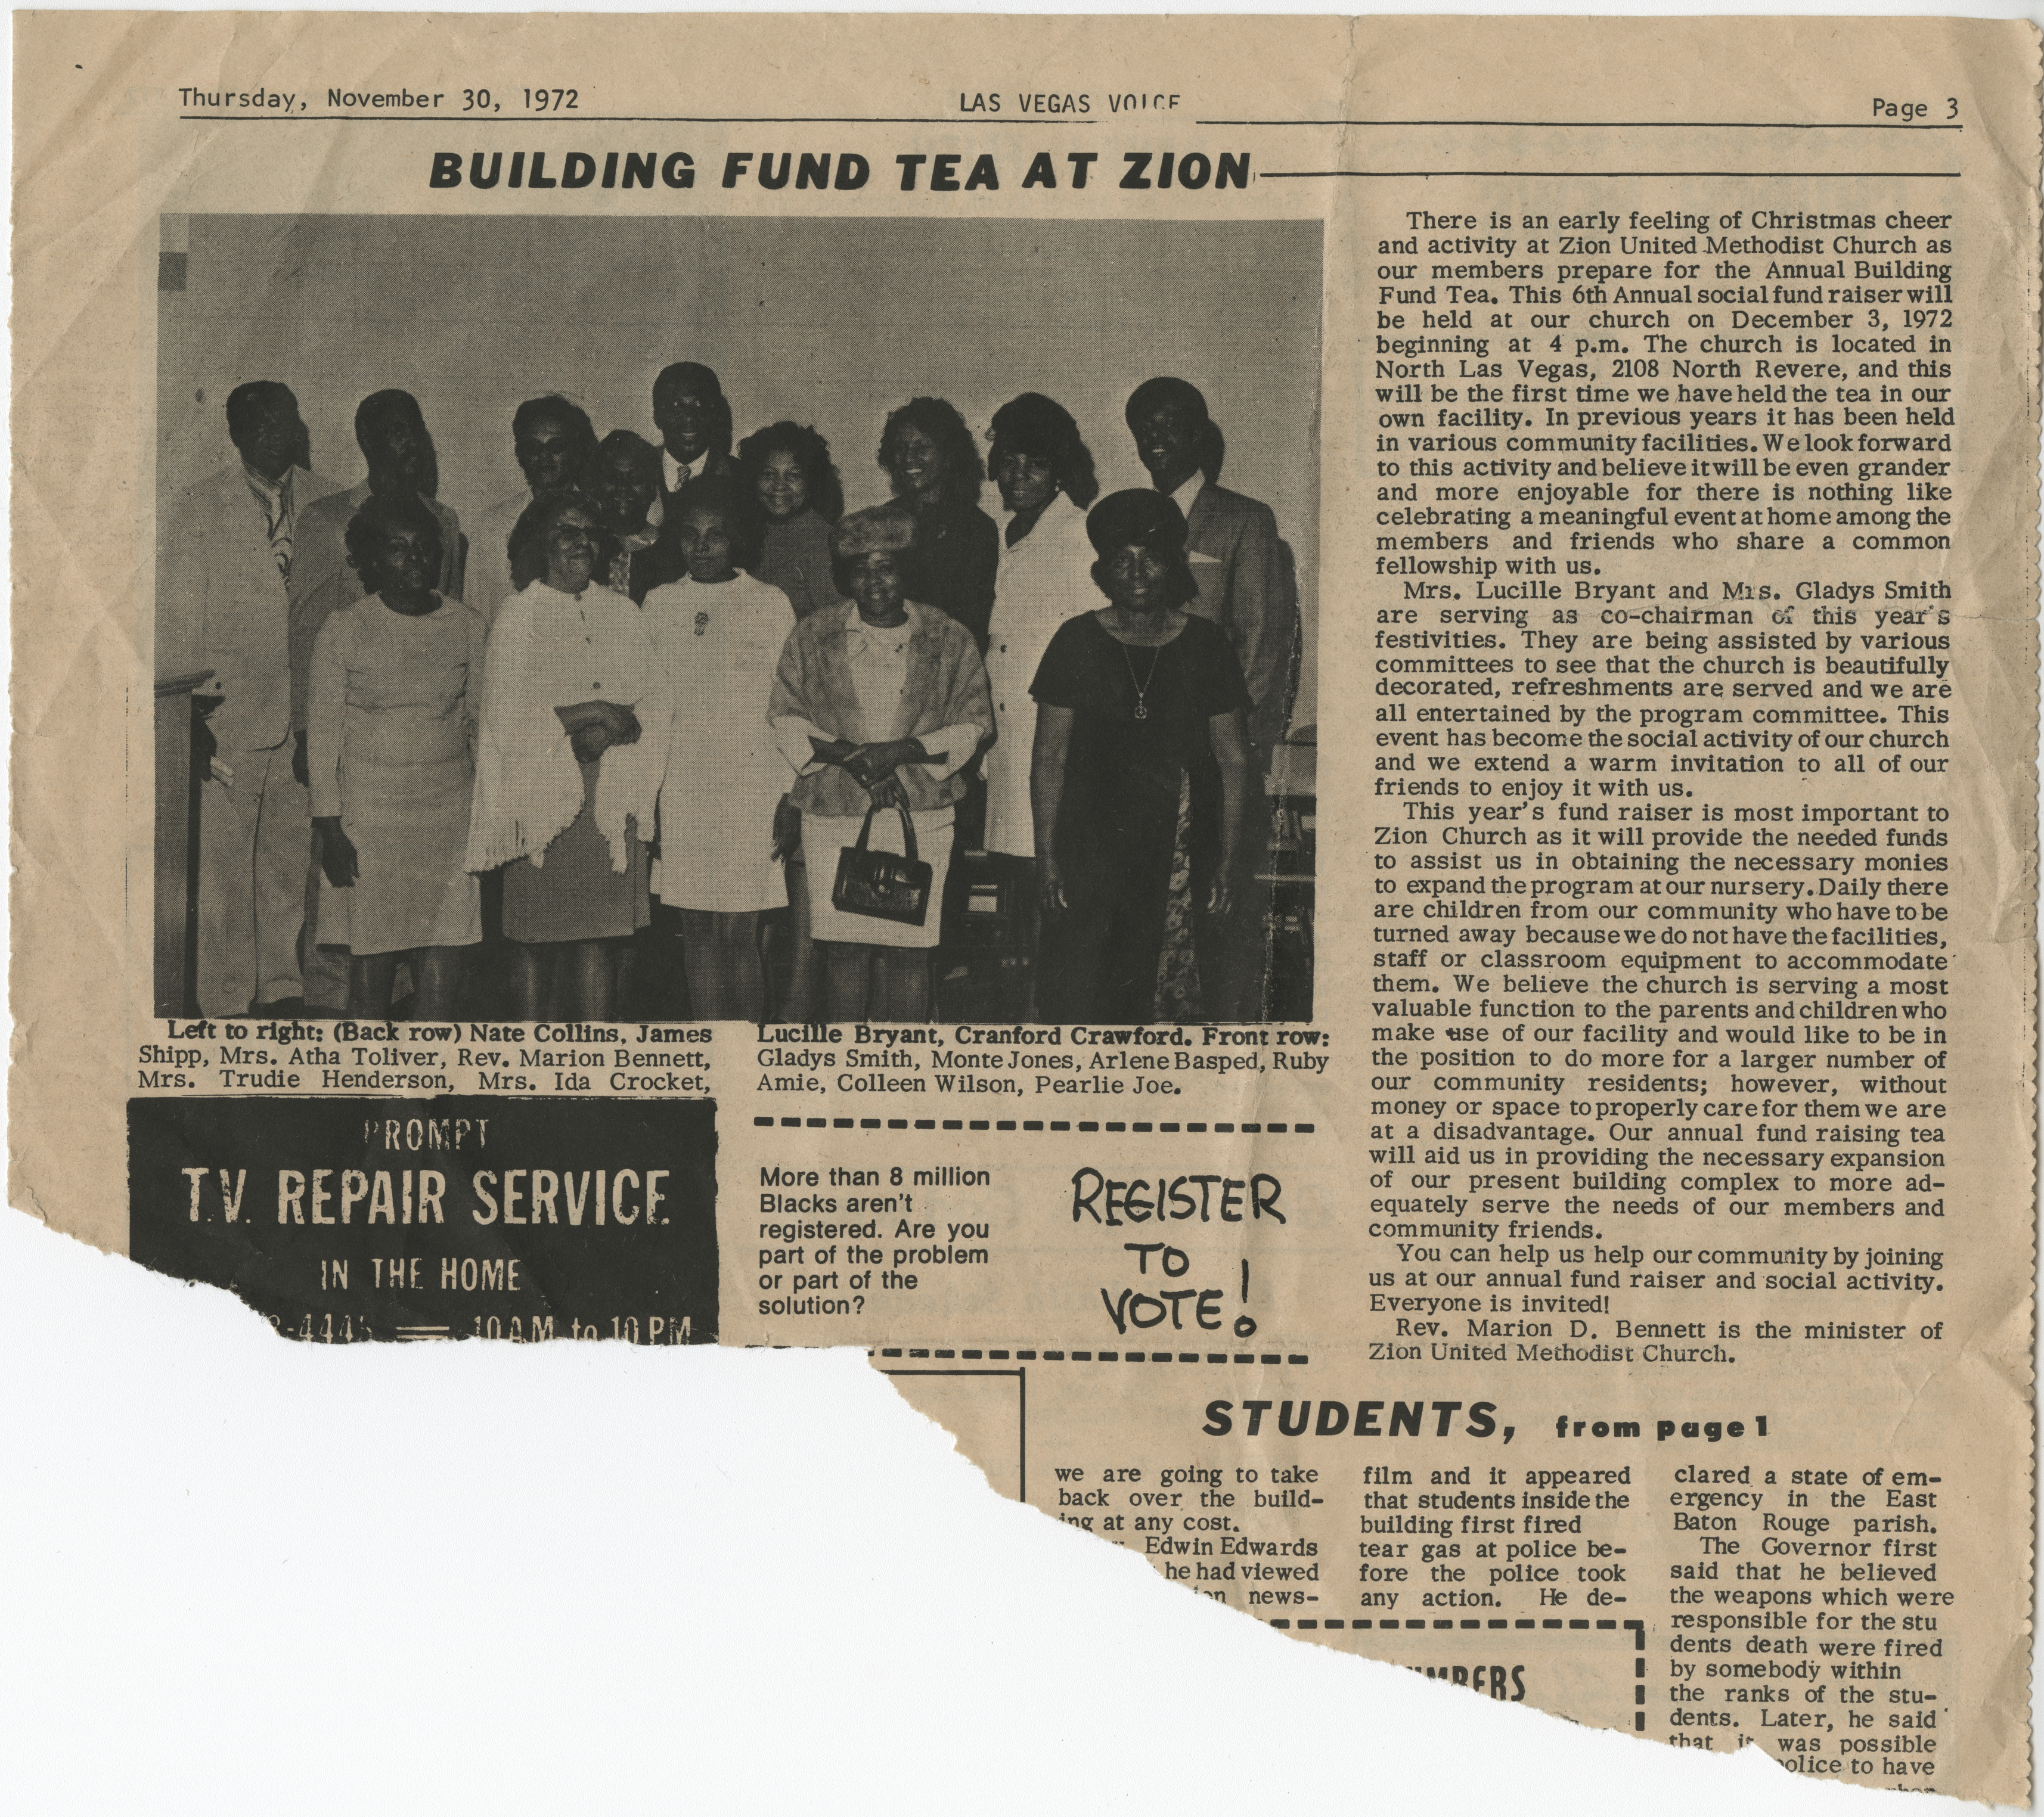 Newspaper clipping, Building Fund Tea at Zion, Las Vegas Voice, November 30, 1972